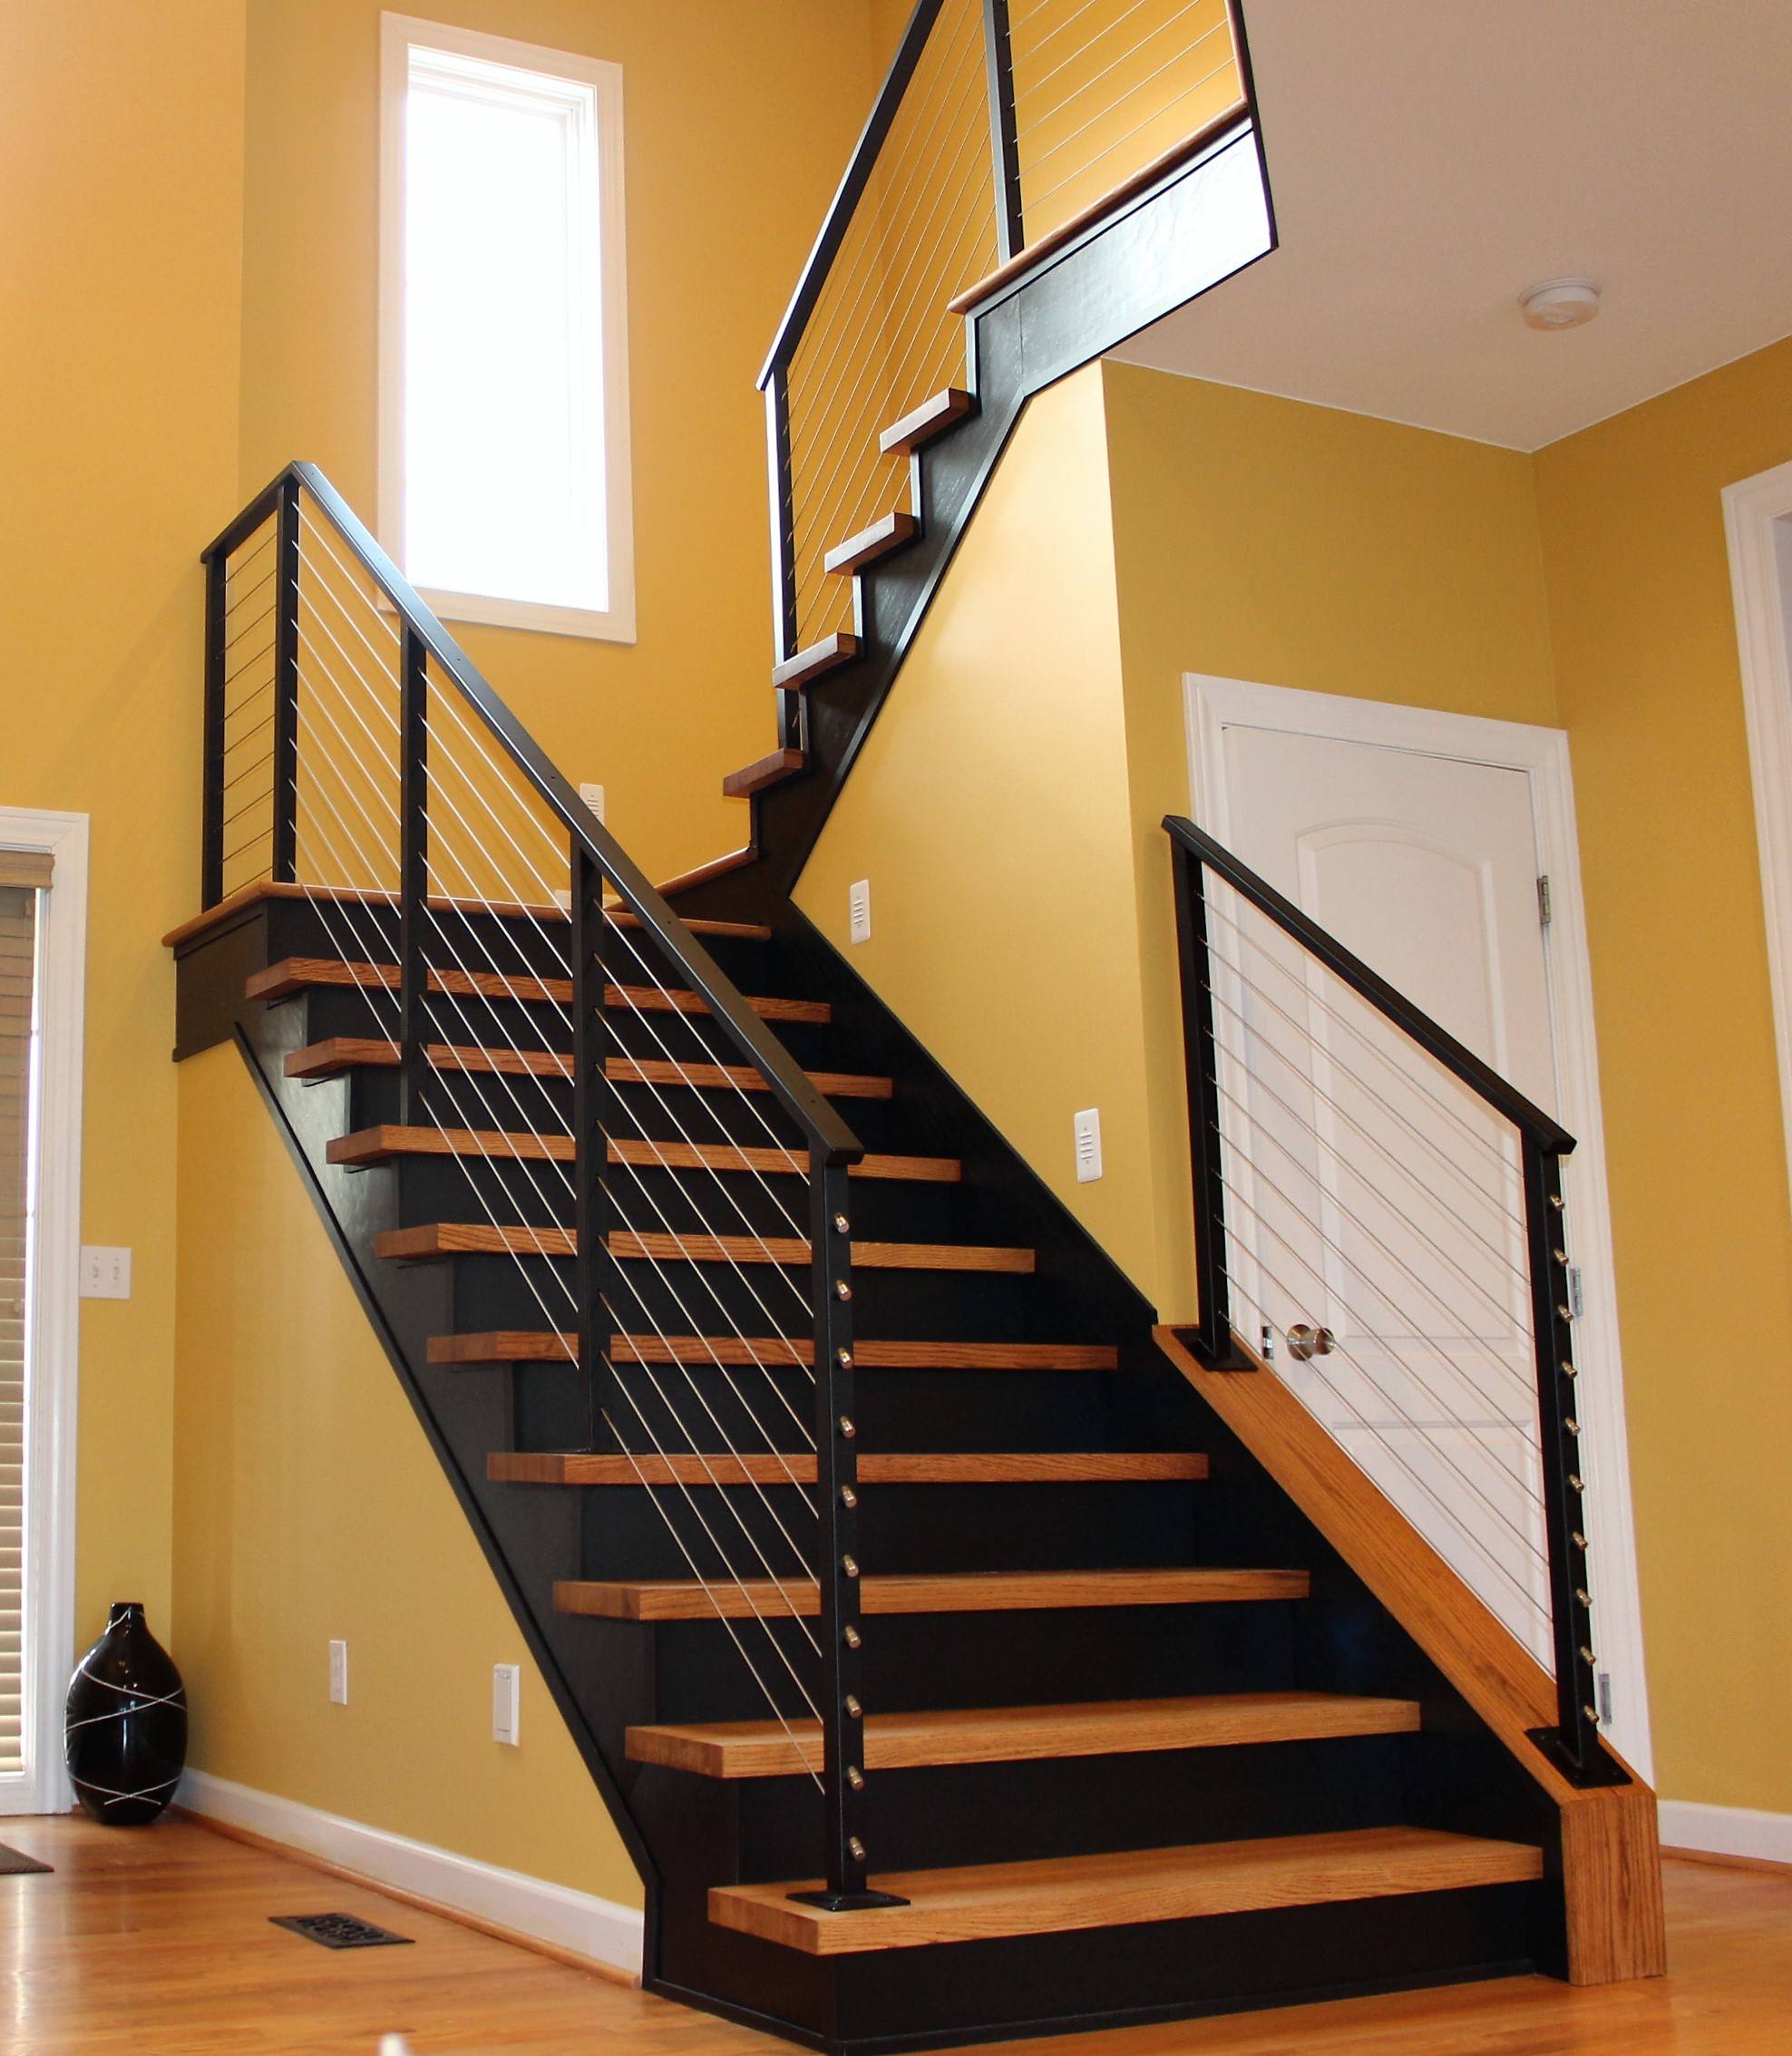 https://st.hzcdn.com/simgs/pictures/staircases/interior-cable-rail-makeover-great-lakes-metal-fabrication-img~29e190e4090c9399_14-0134-1-d7e2f16.jpg